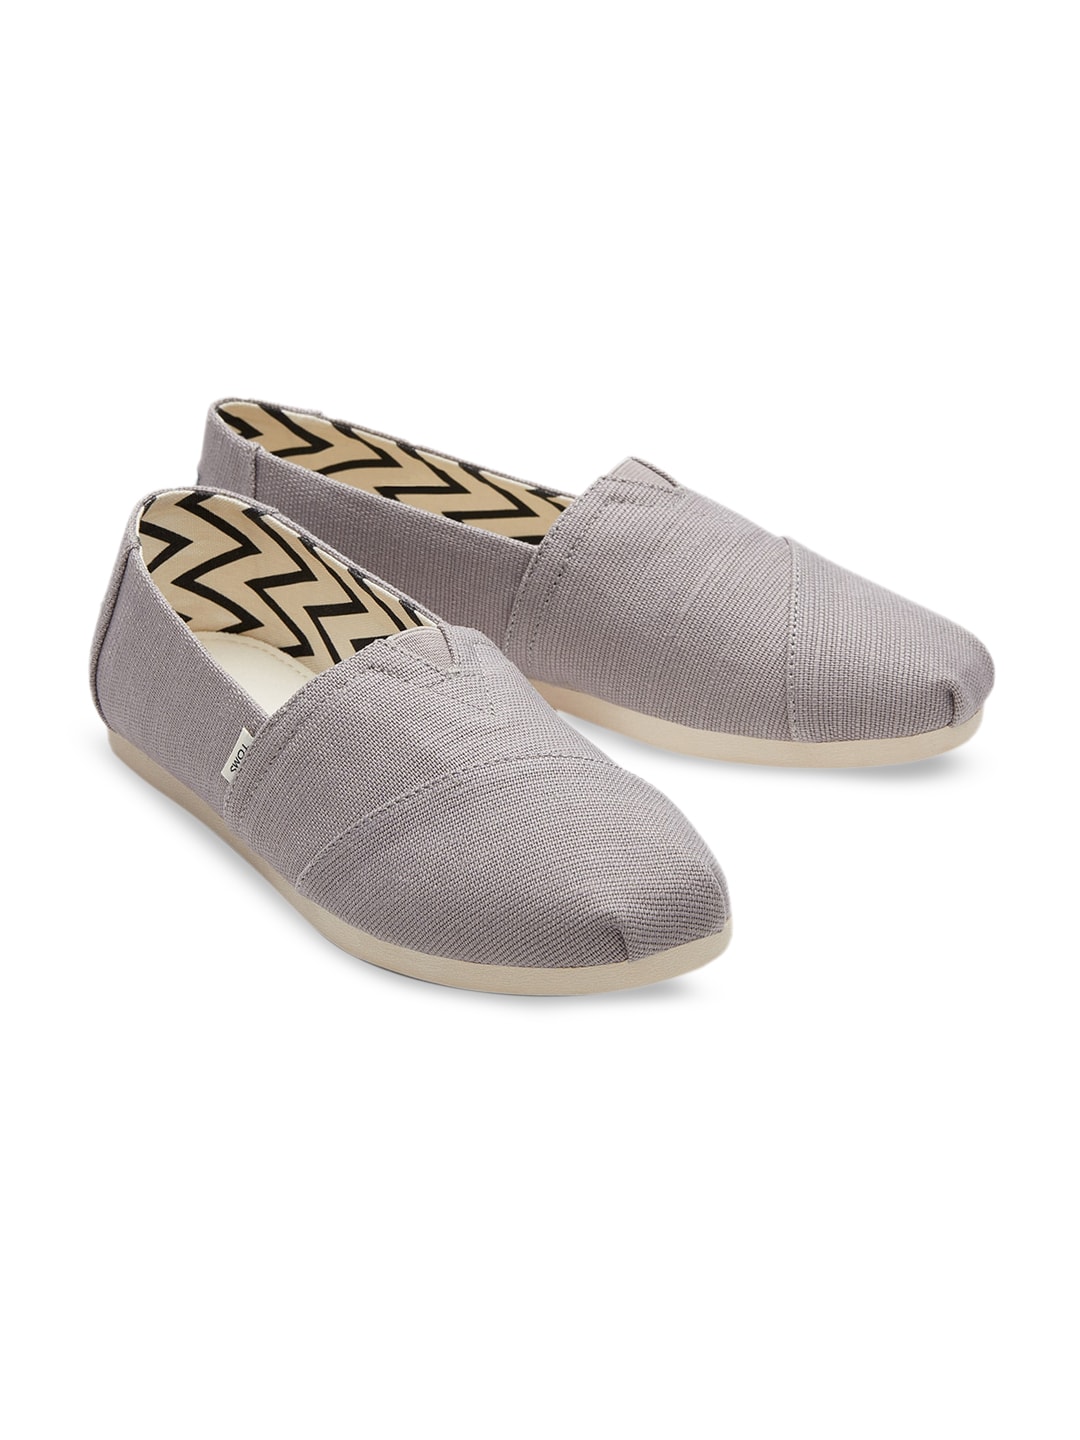 TOMS Women Grey Solid Alpargata Canvas Slip-on Sneakers Price in India